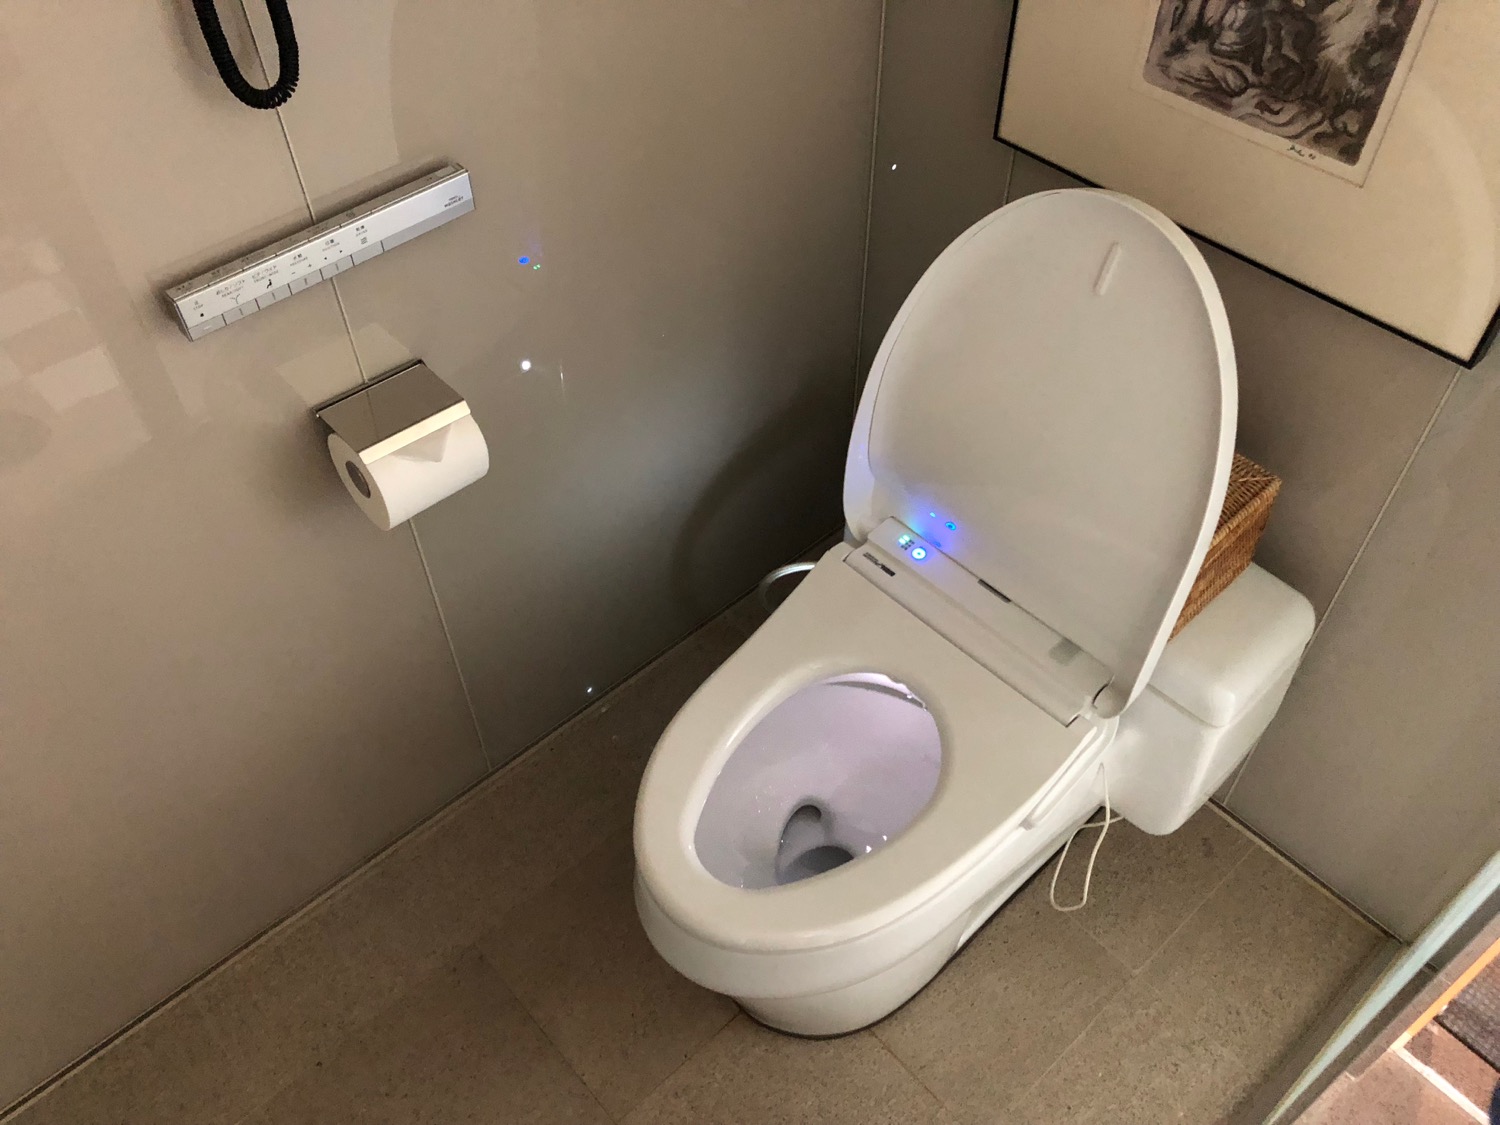 a toilet with lights on the lid